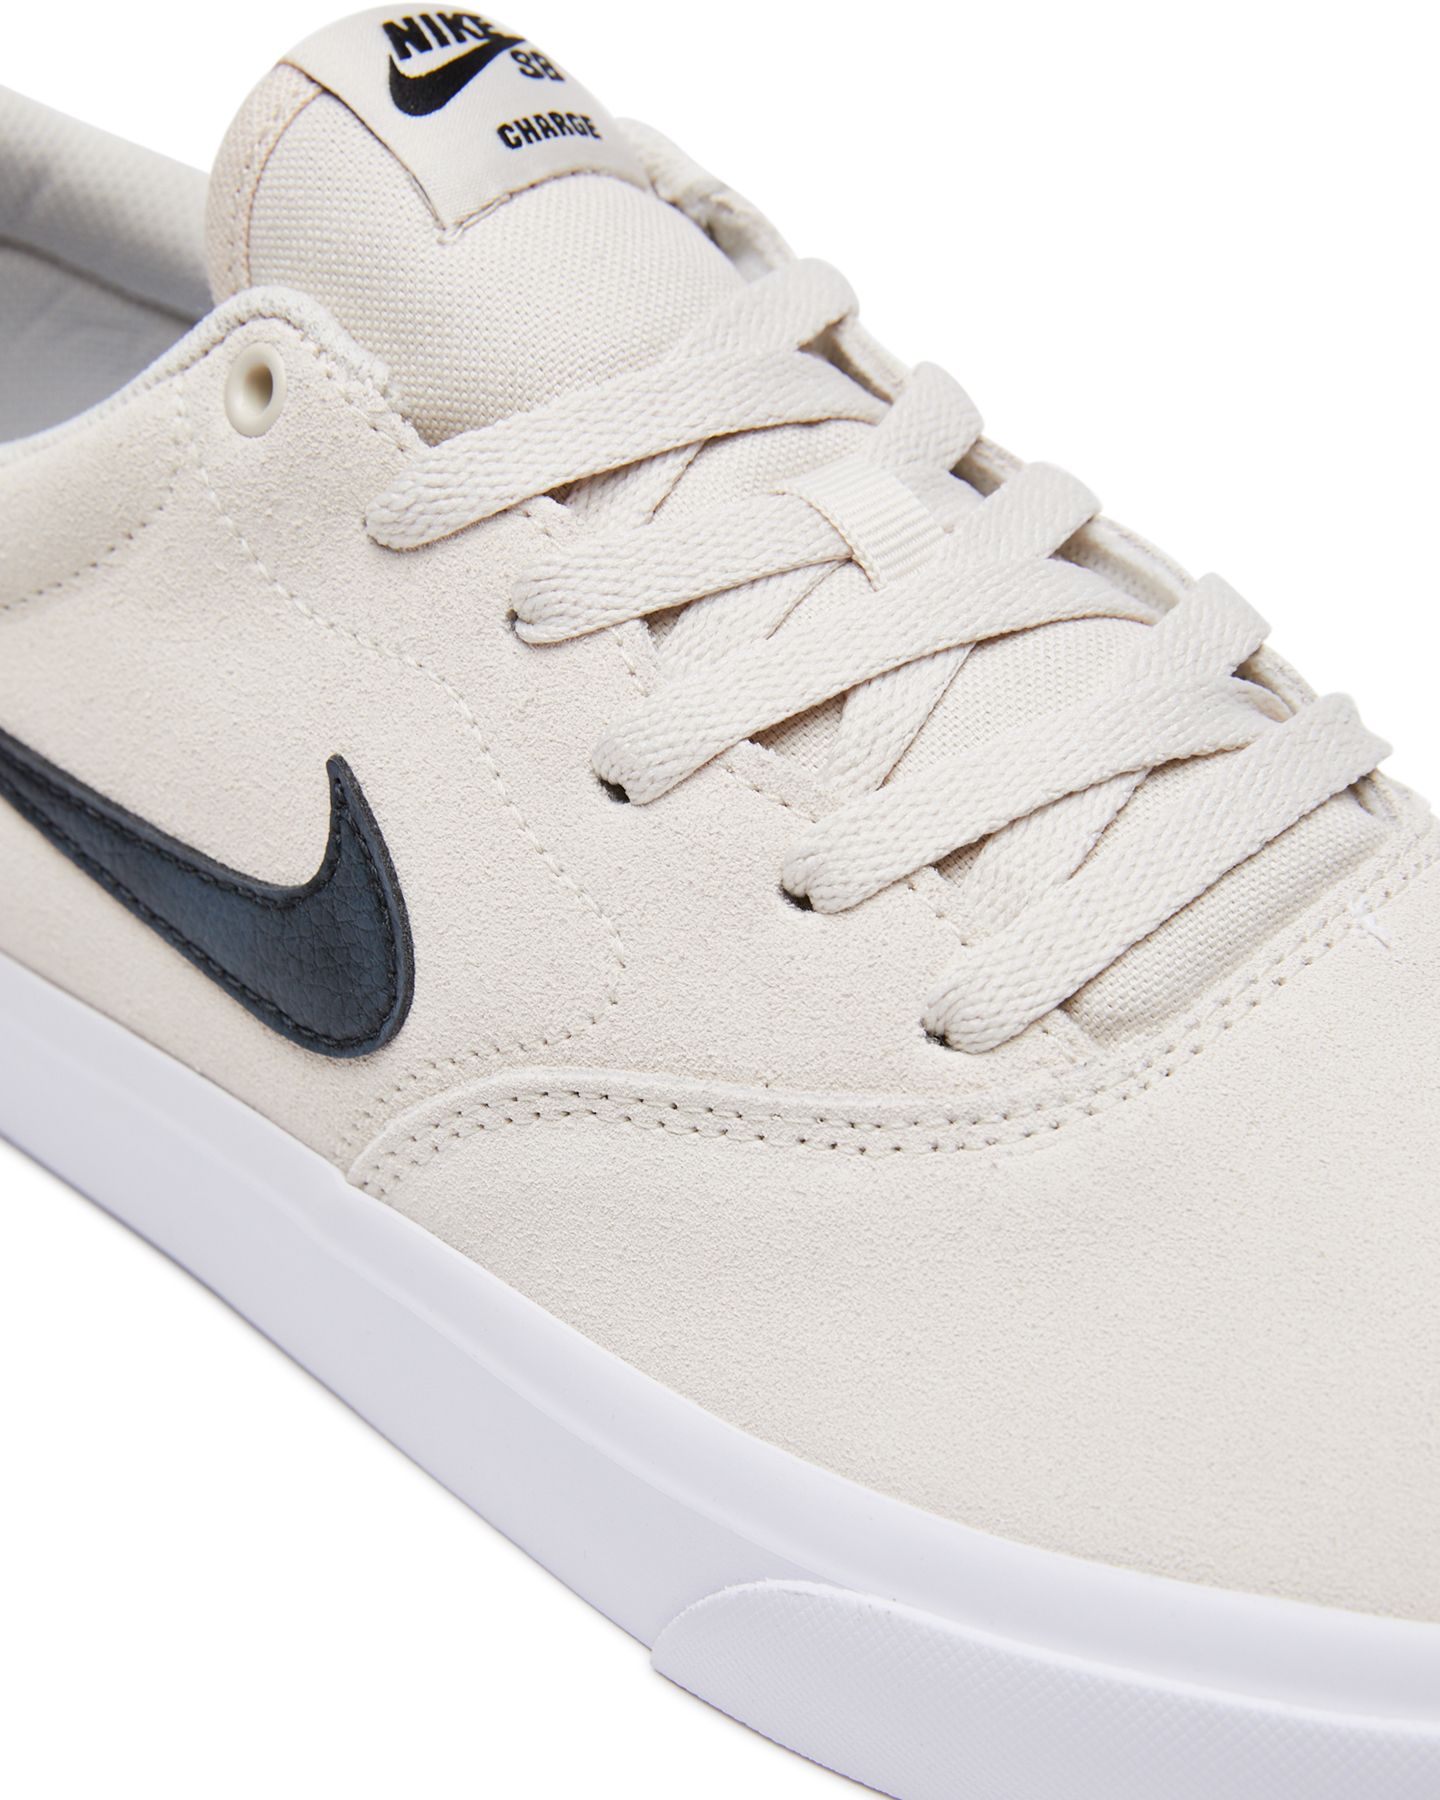 Nike Sb Charge Suede Shoe - Orewood | SurfStitch